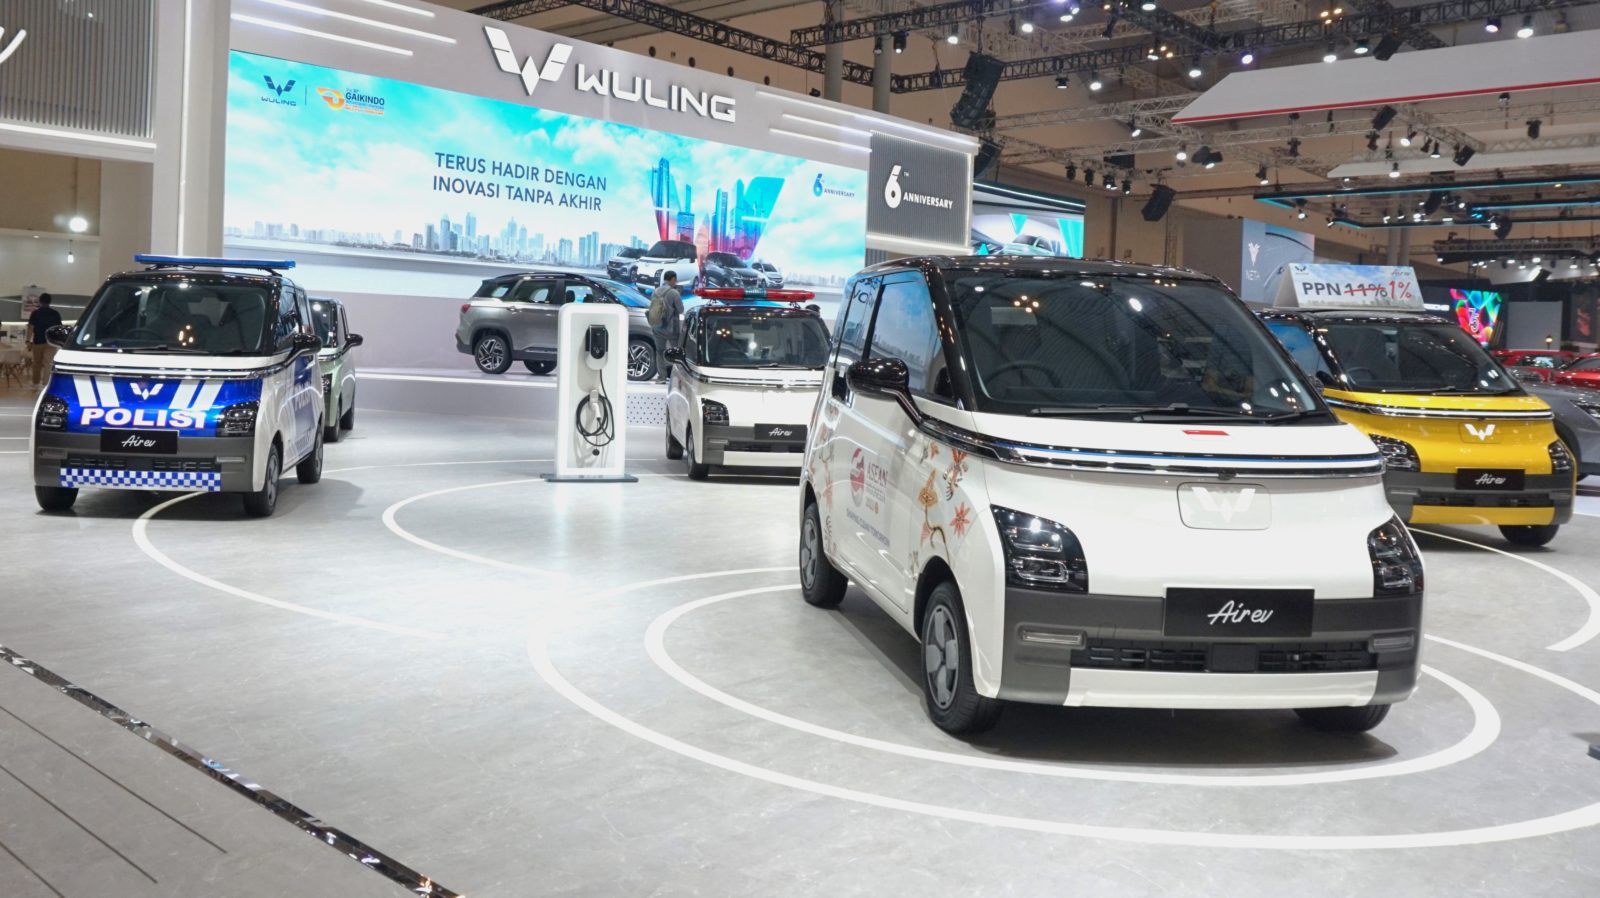 Image Wuling Presents Various Air ev Special Displays at the GIIAS 2023 Exhibition